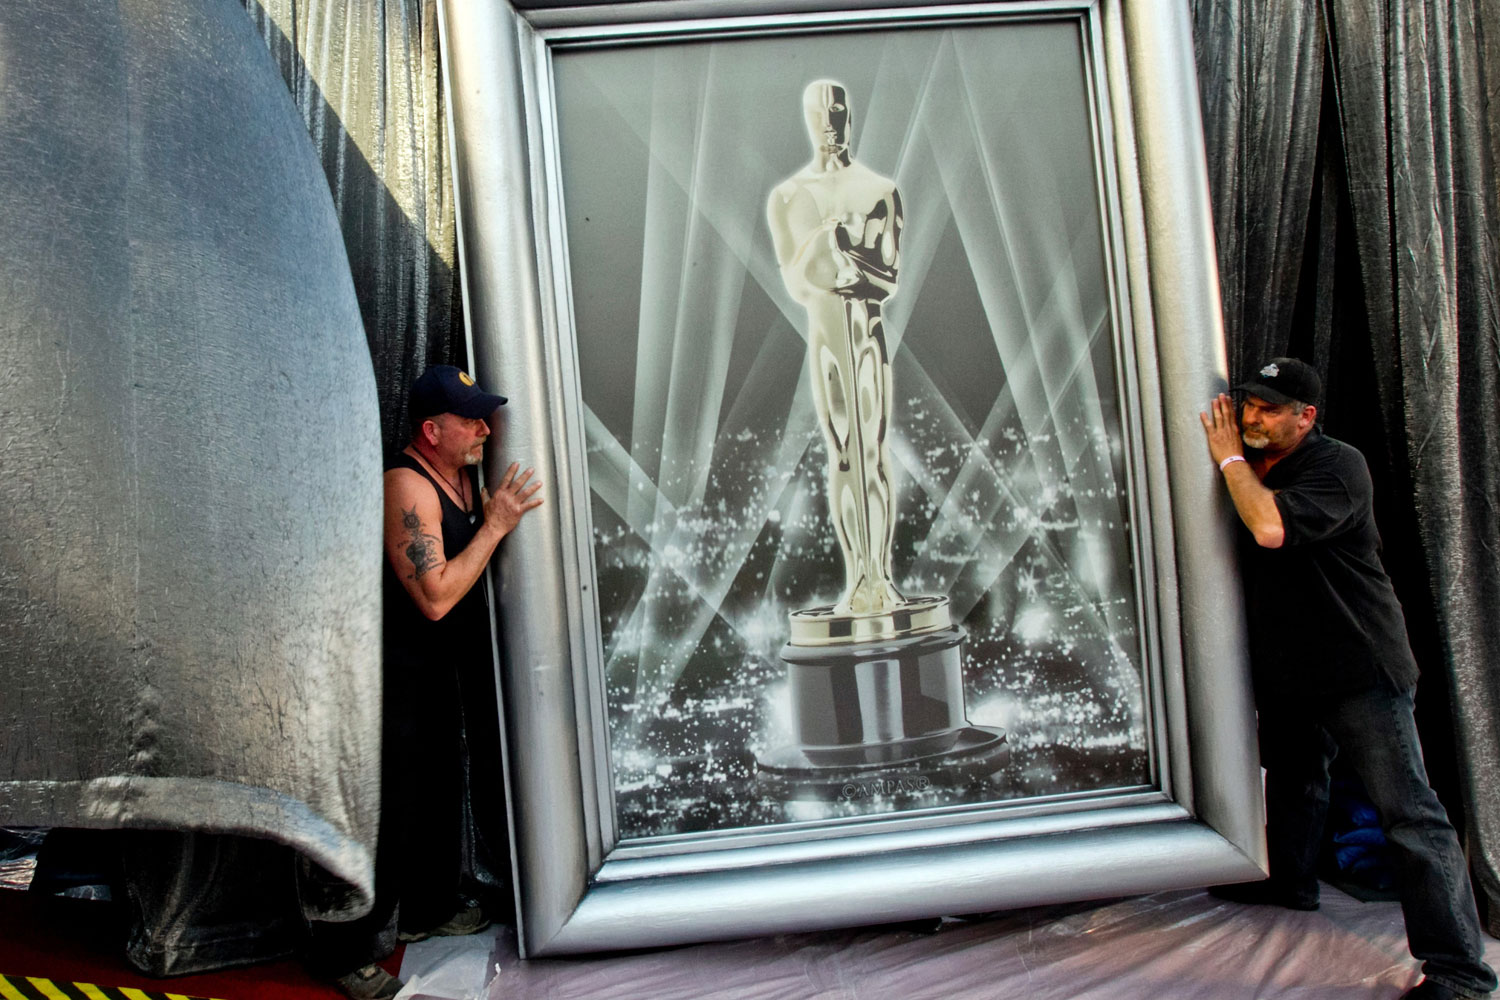 Feb. 23, 2012. International Alliance of Theatrical Stage Employees Union Local 33 Hollywood stage crewmen Shawn Schull, left, and John Shipton move an Oscar frame for the 84th Annual Academy Awards, to be held on Sunday, outside the Kodak Theatre in Los Angeles.